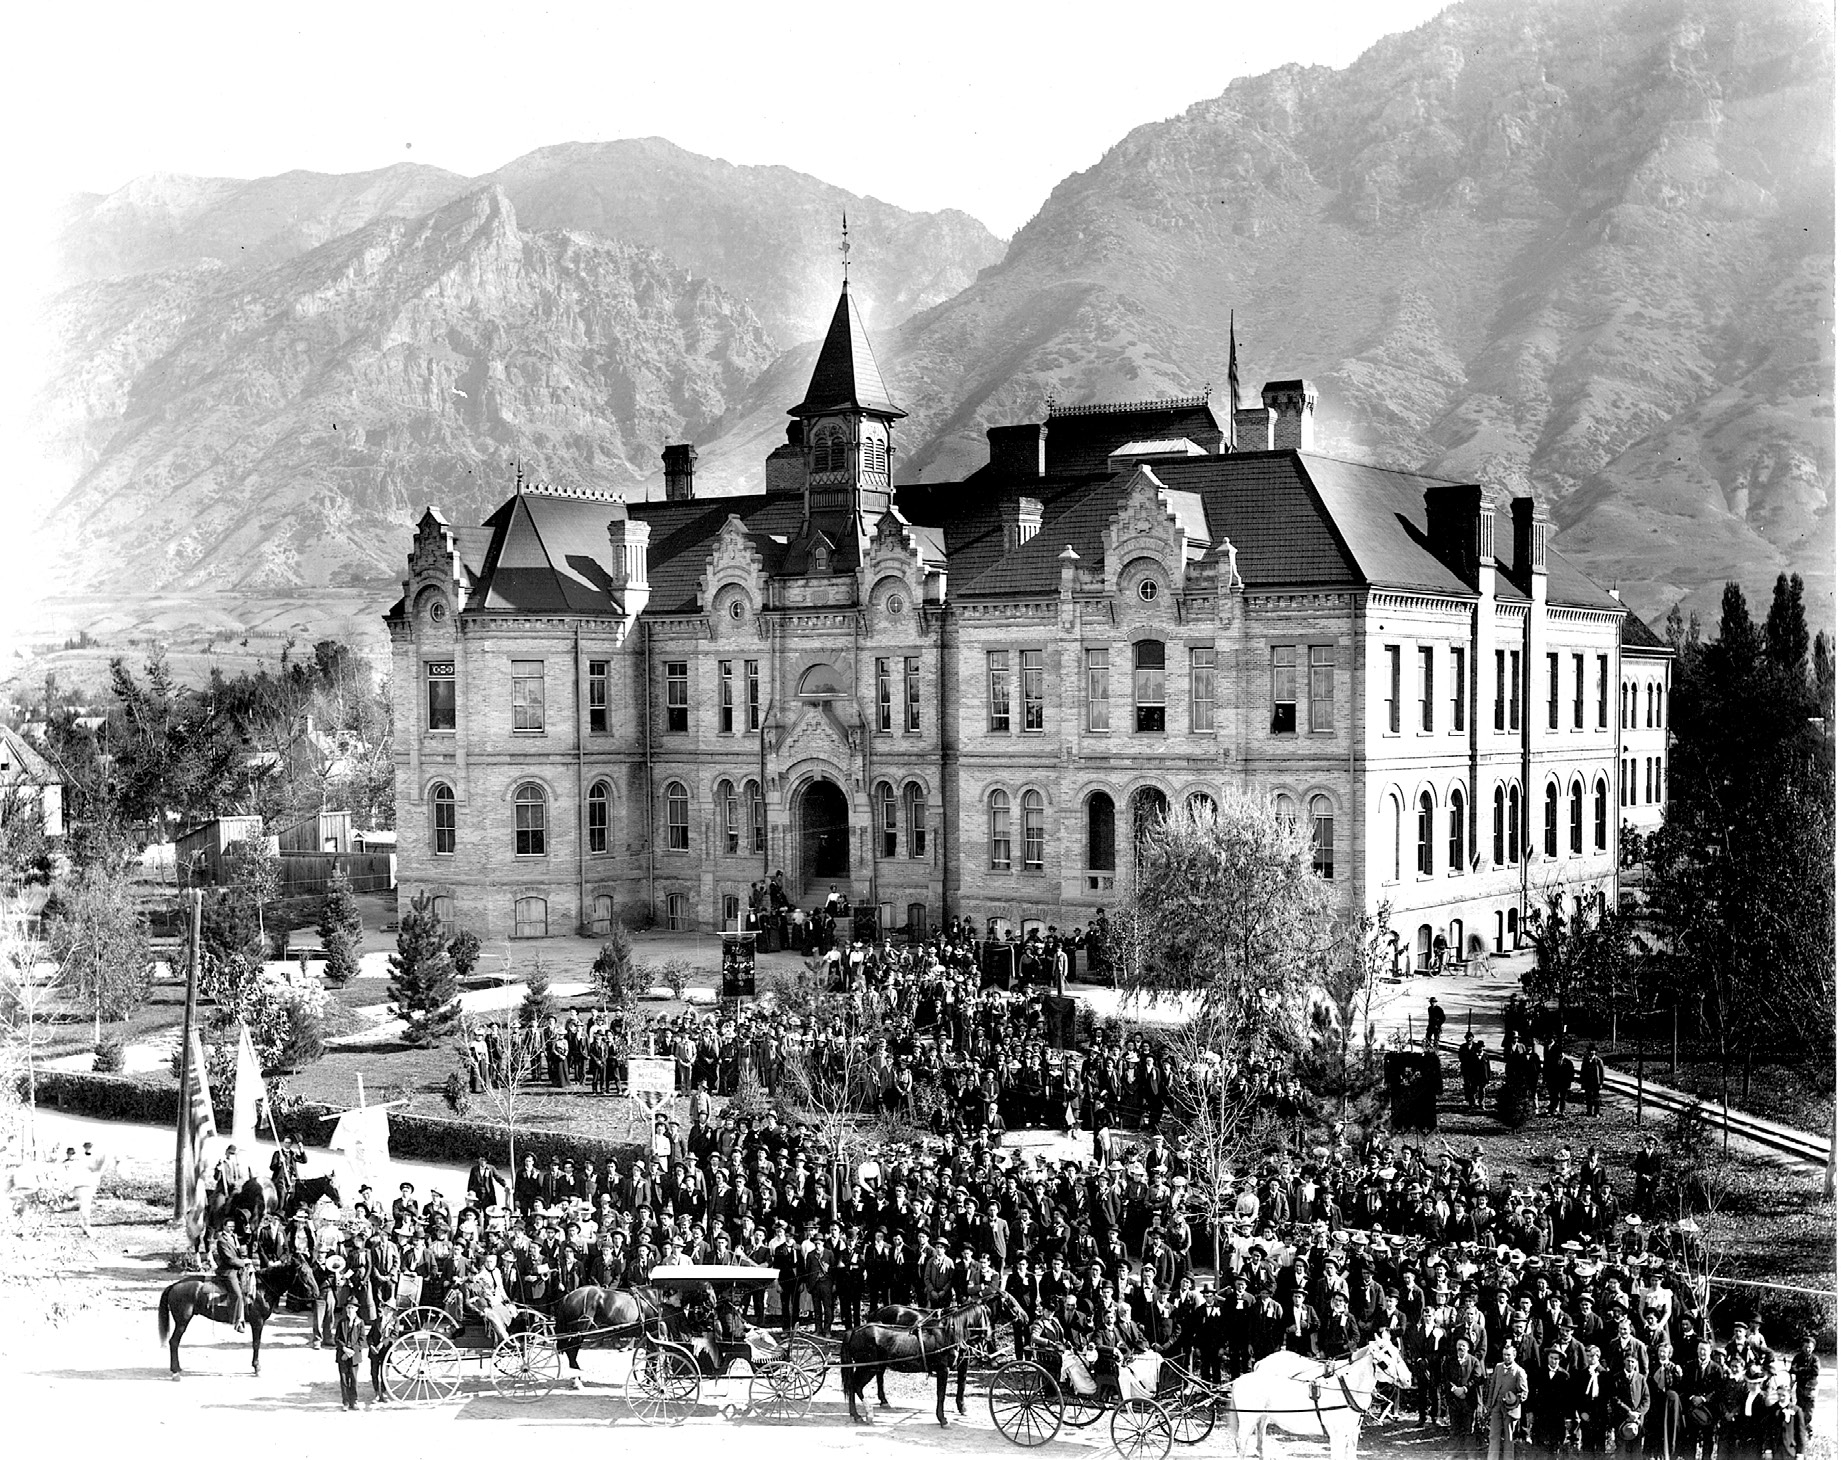 Brigham Young Academy, Provo, Utah, ca. 1900. Photograph by Charles Roscoe Savage.